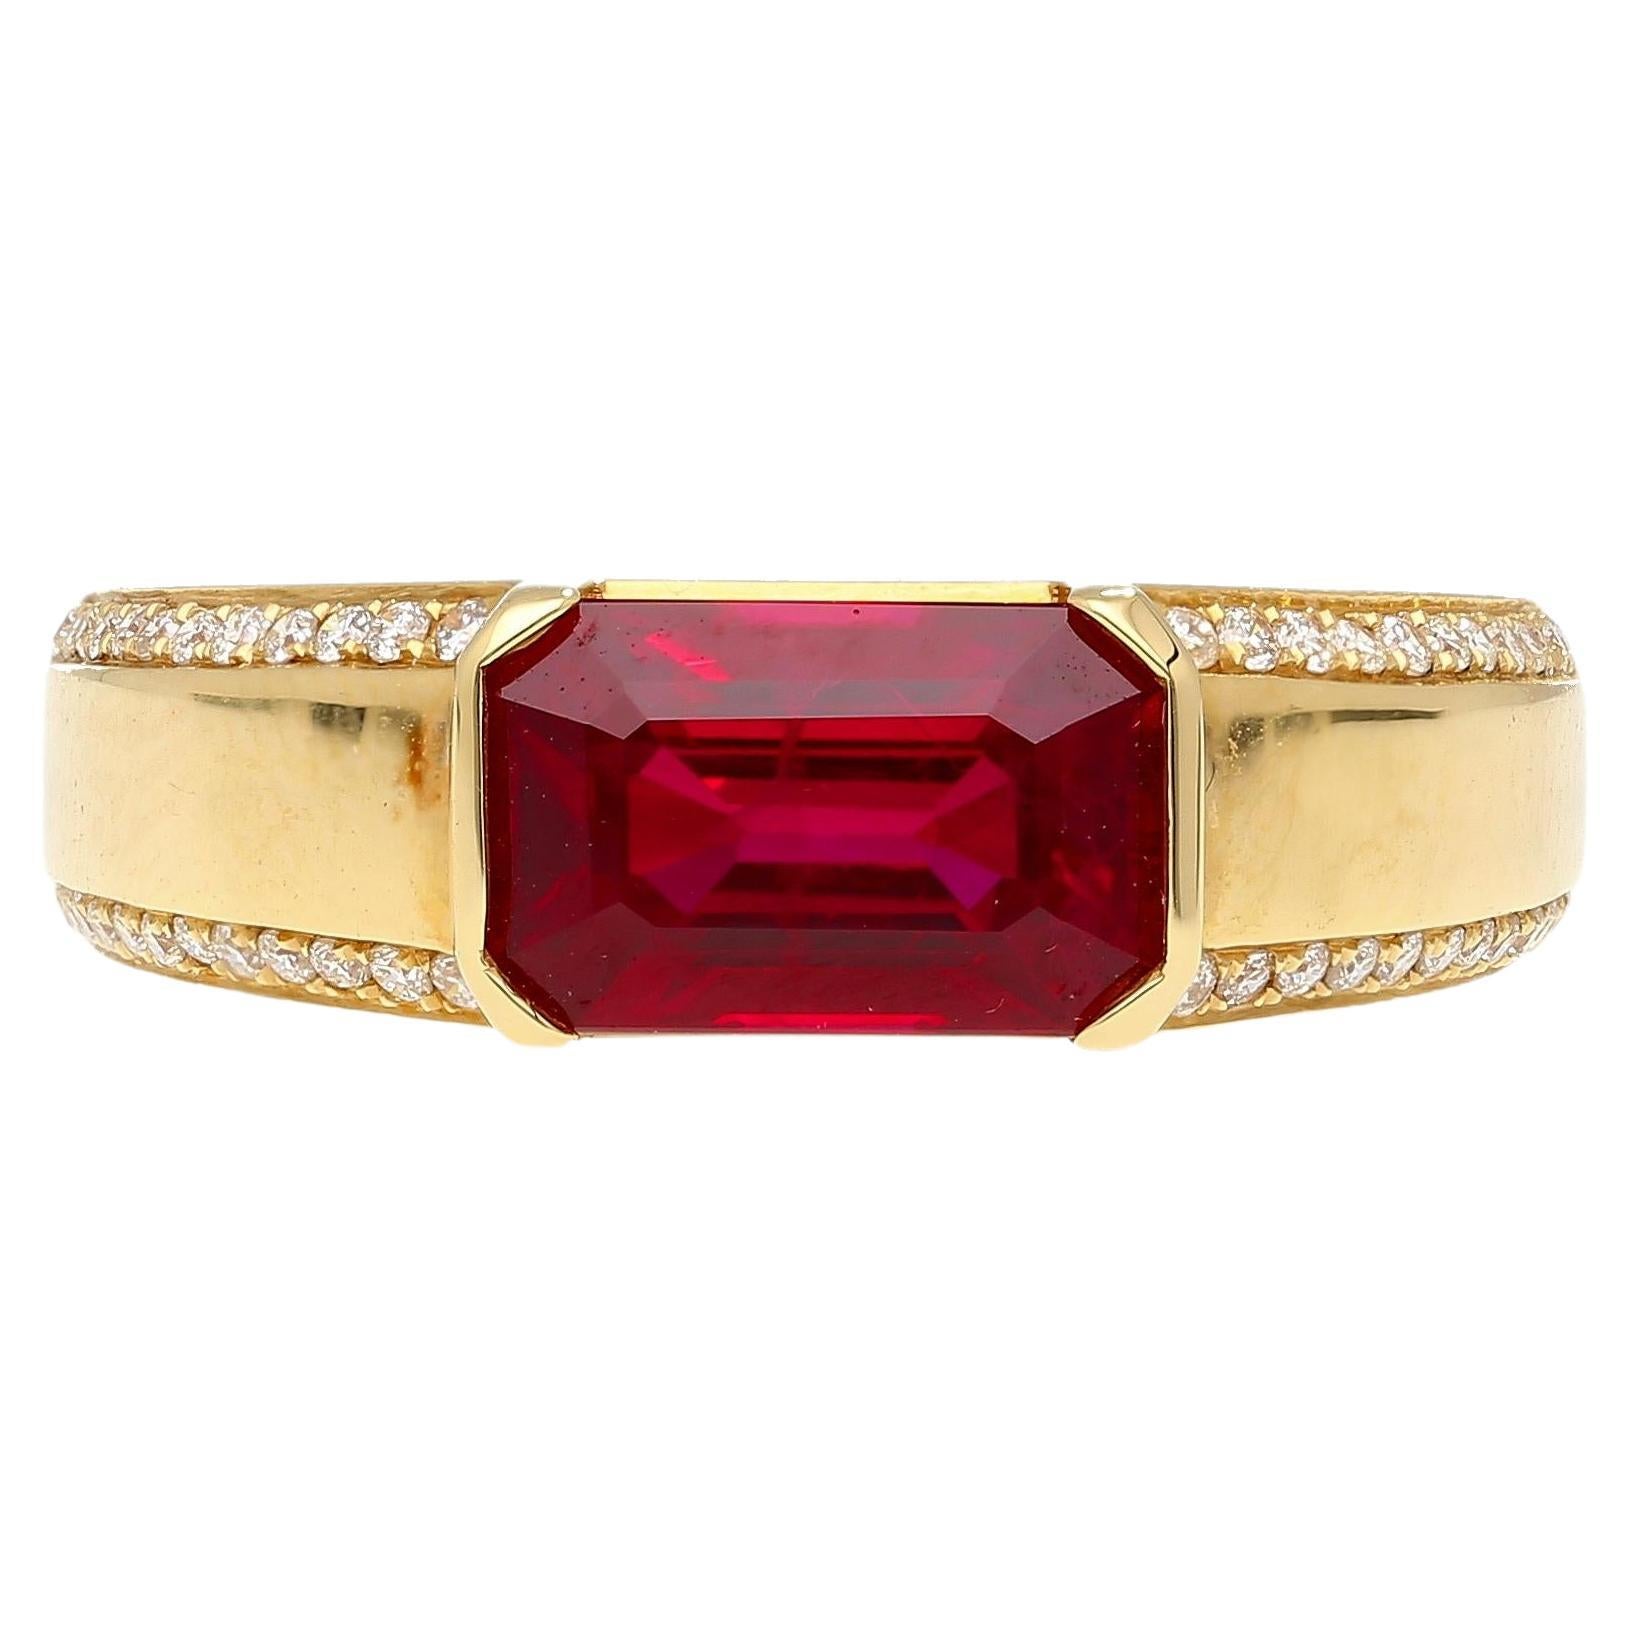 2.09 Carat Vivid Red Pigeon's Blood Burma Ruby Emerald Cut East-West Ring For Sale